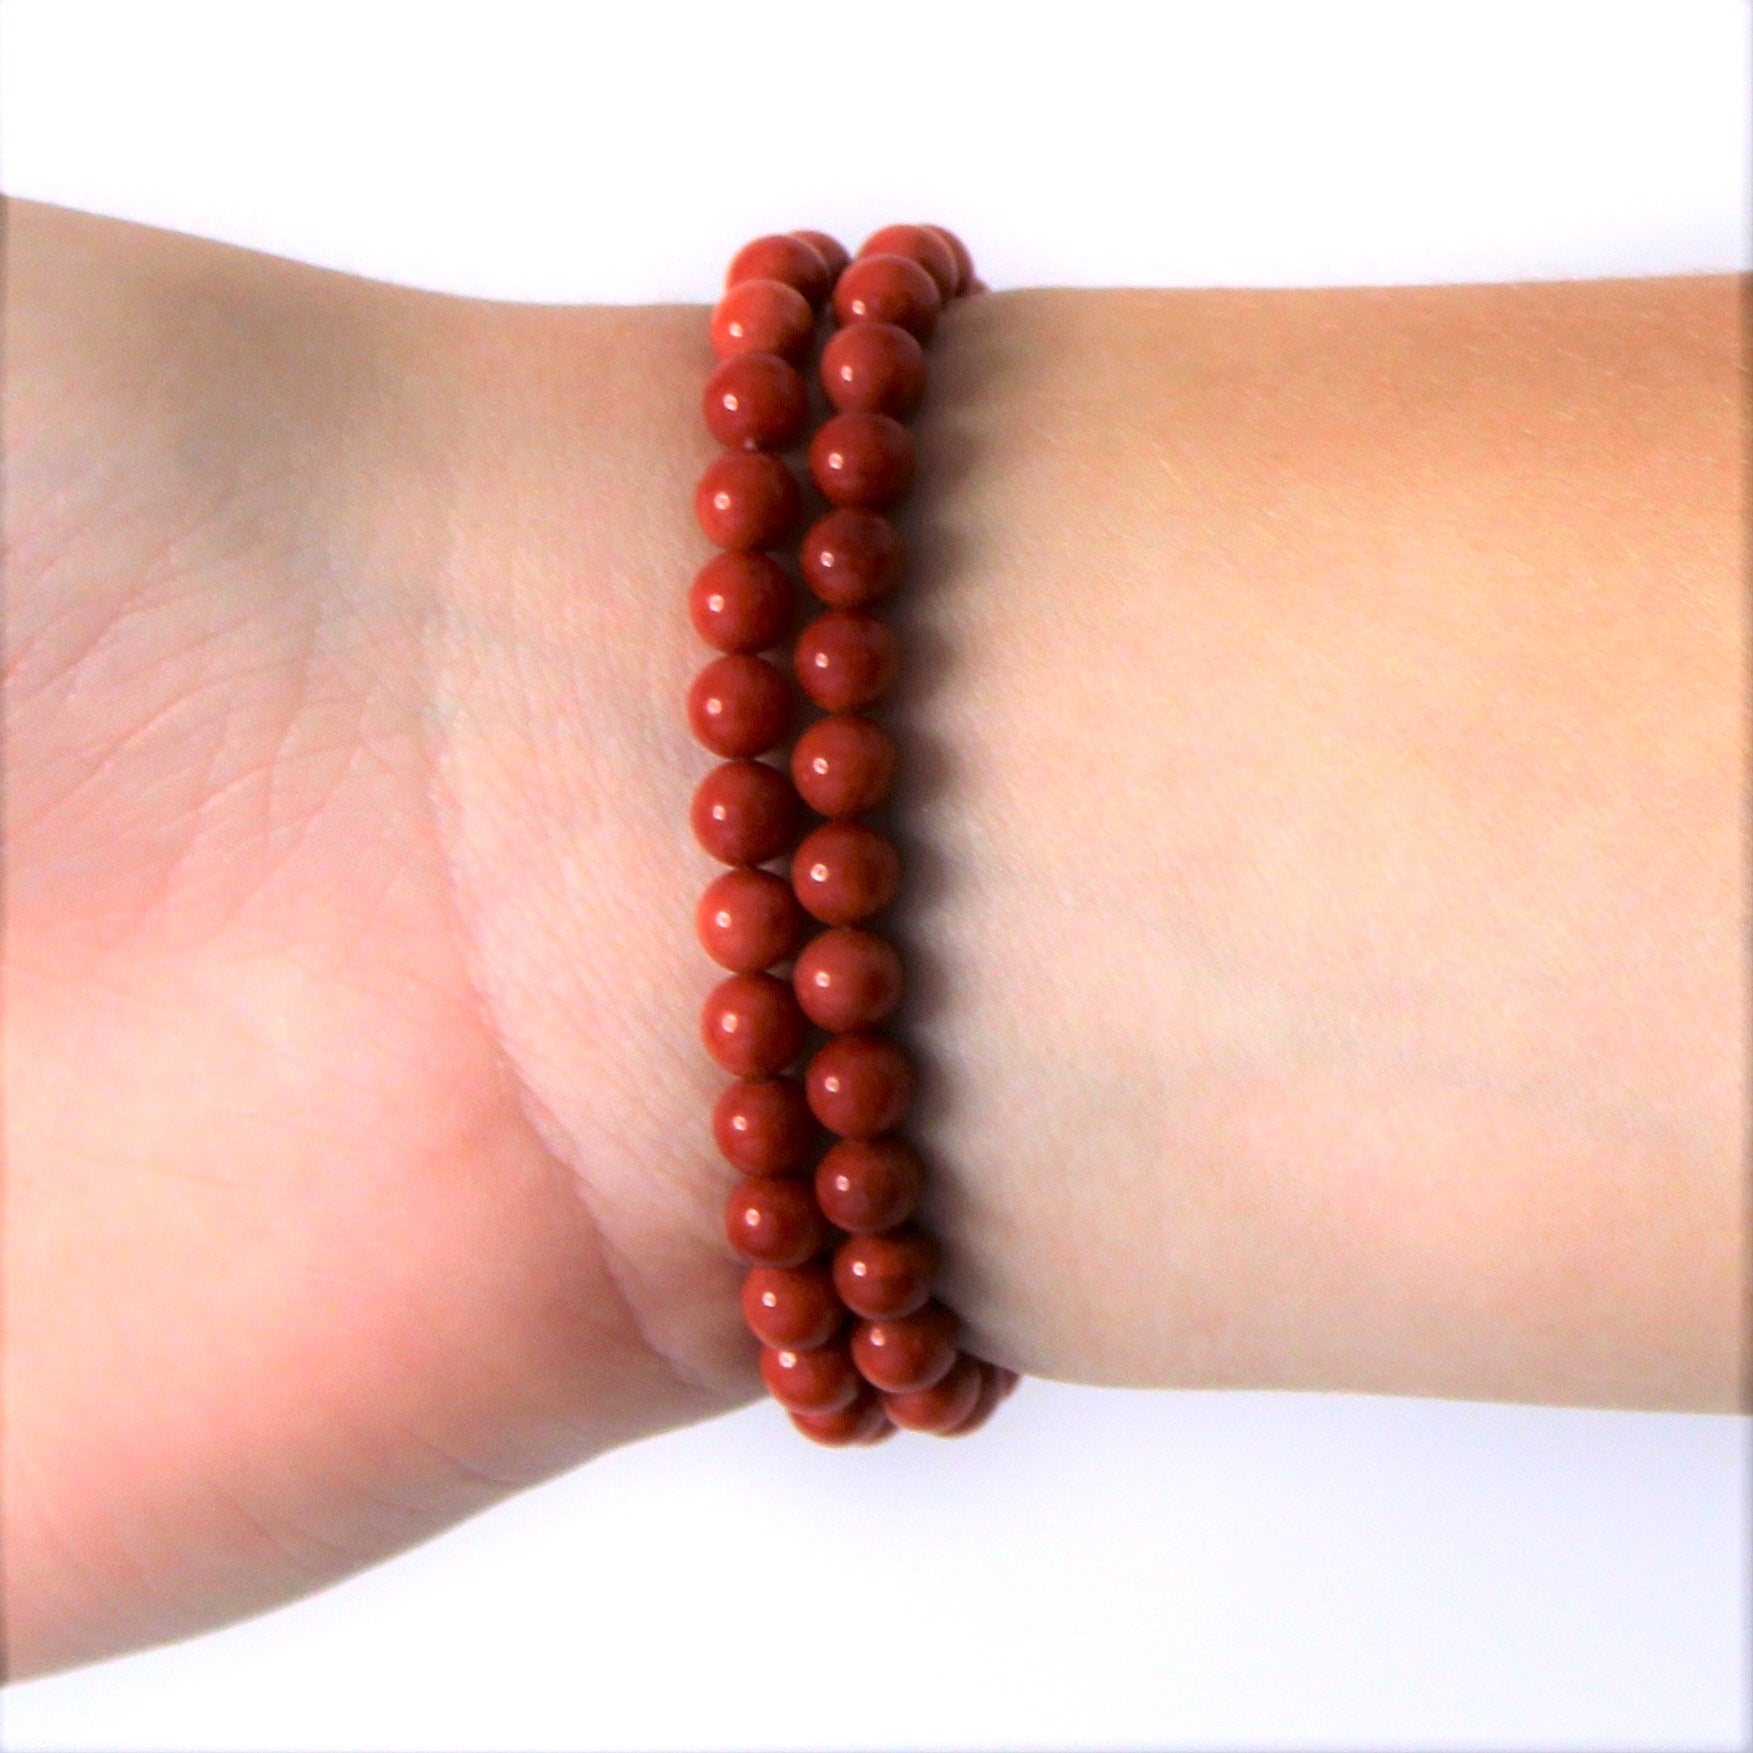 Red Coral Beads Bracelet